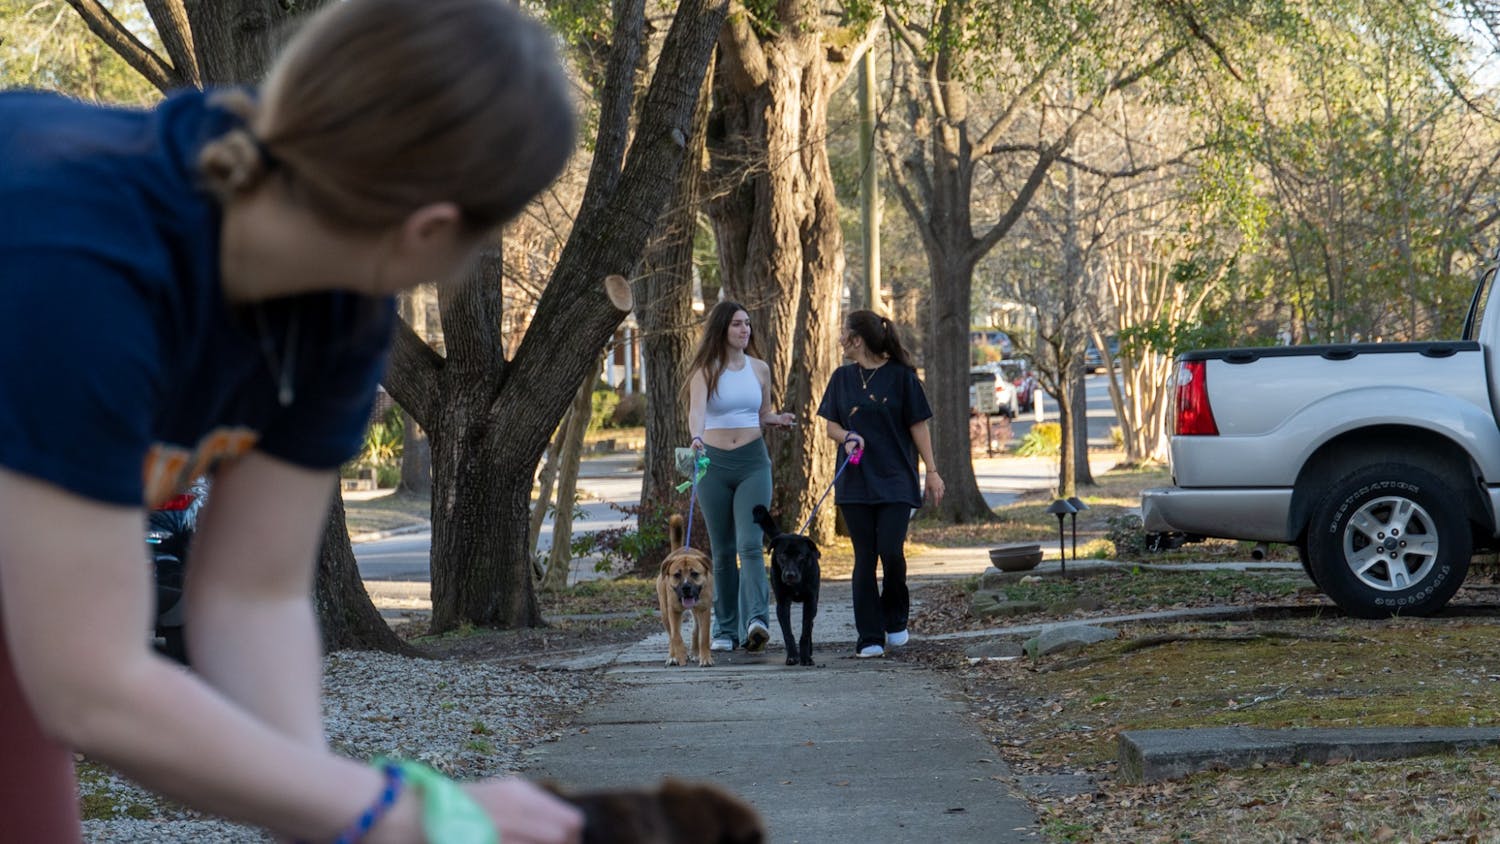 Members of the Give a Dog A Bone club walk dogs down Sumter St. on Feb 18, 2022. Final Victory Animal Shelter welcomes club members and community volunteers to walk and shelter the dogs in their care.